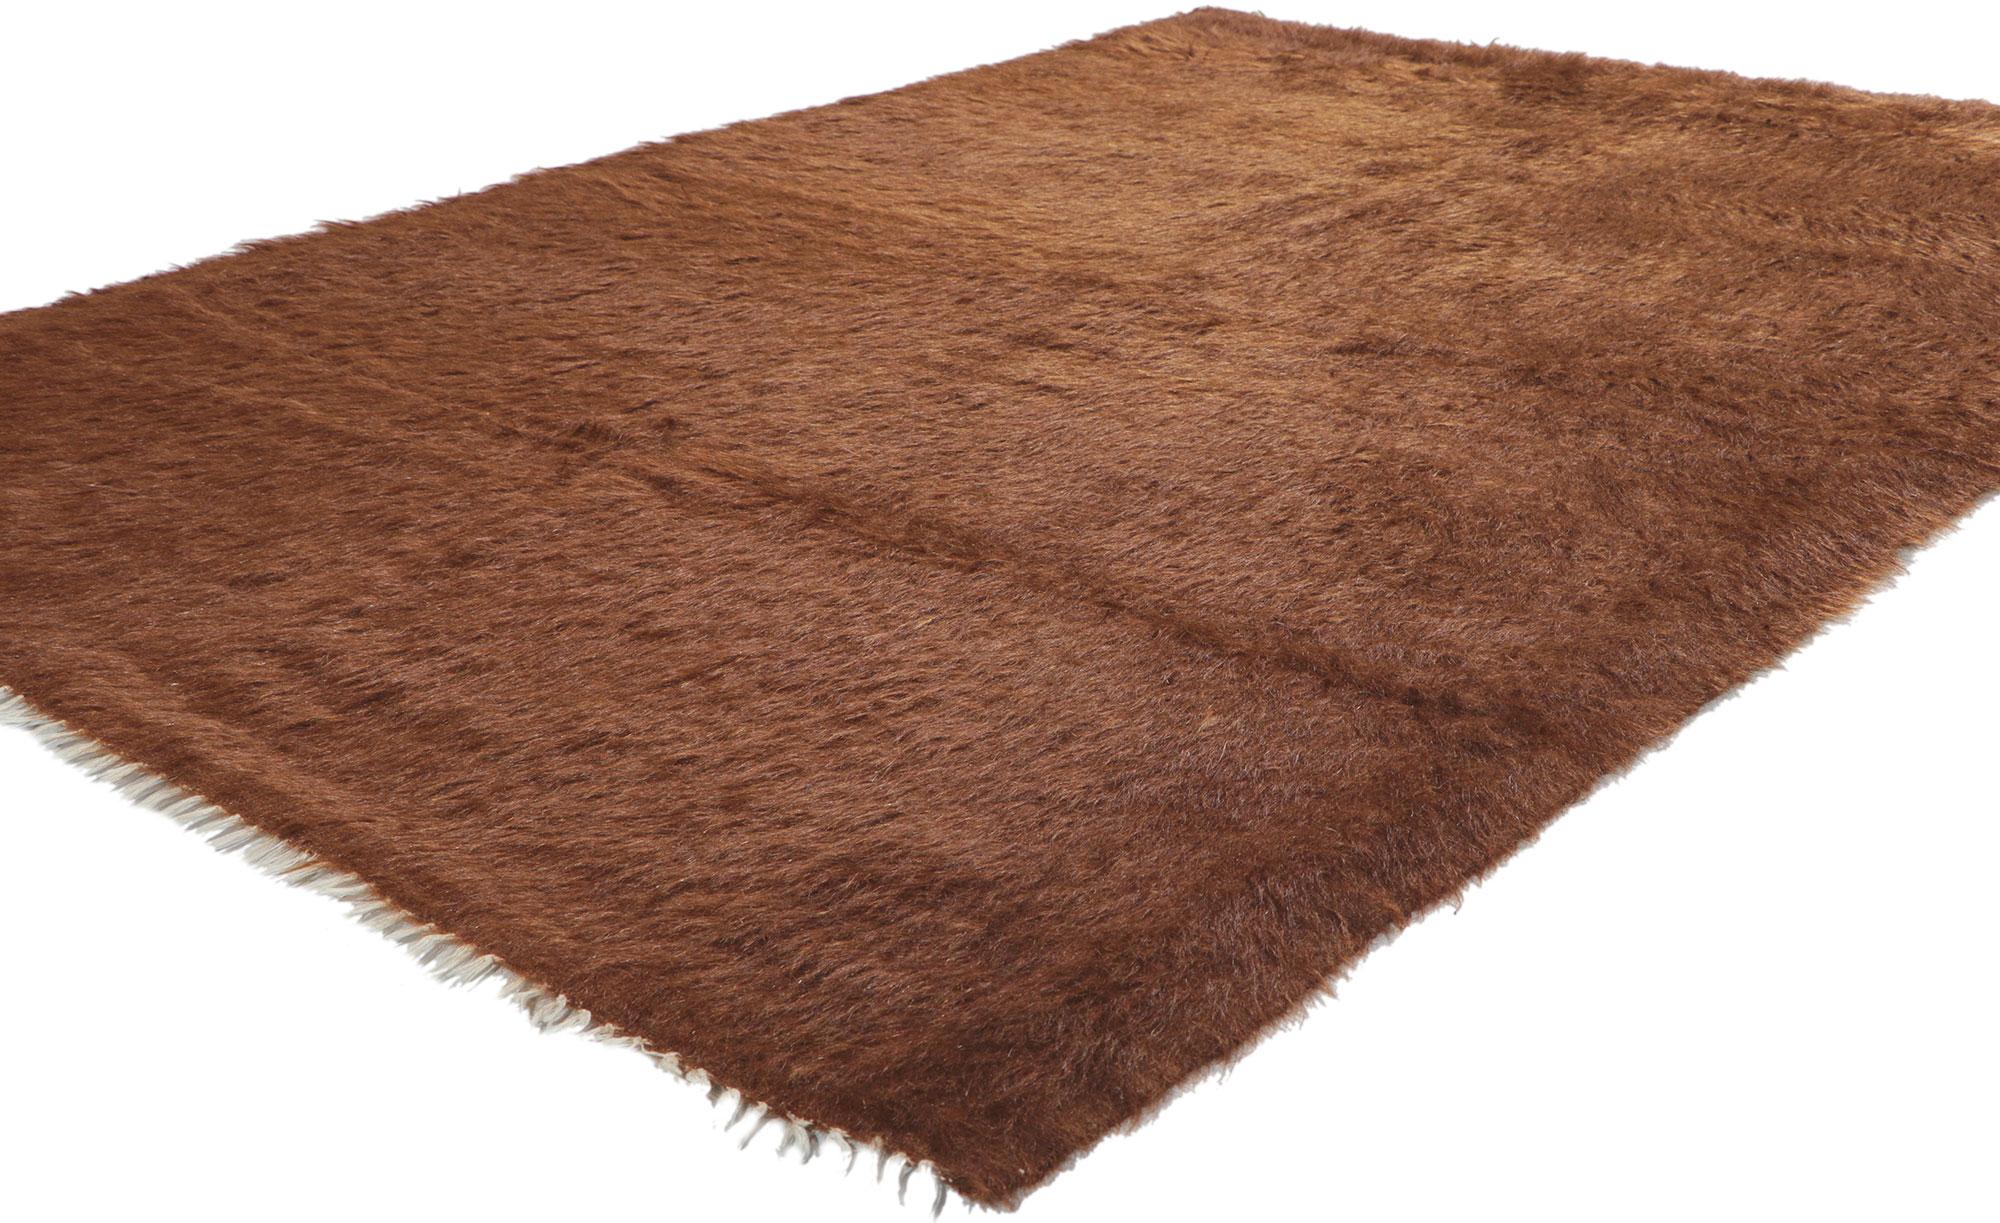 53840 Vintage Turkish Angora Wool Kilim Blanket Rug, 04'08 x 06'07. With its shaggy pile, incredible detail and texture, this handwoven Turkish angora kilim rug is a captivating vision of woven beauty. The minimalist design and earthy colorway woven